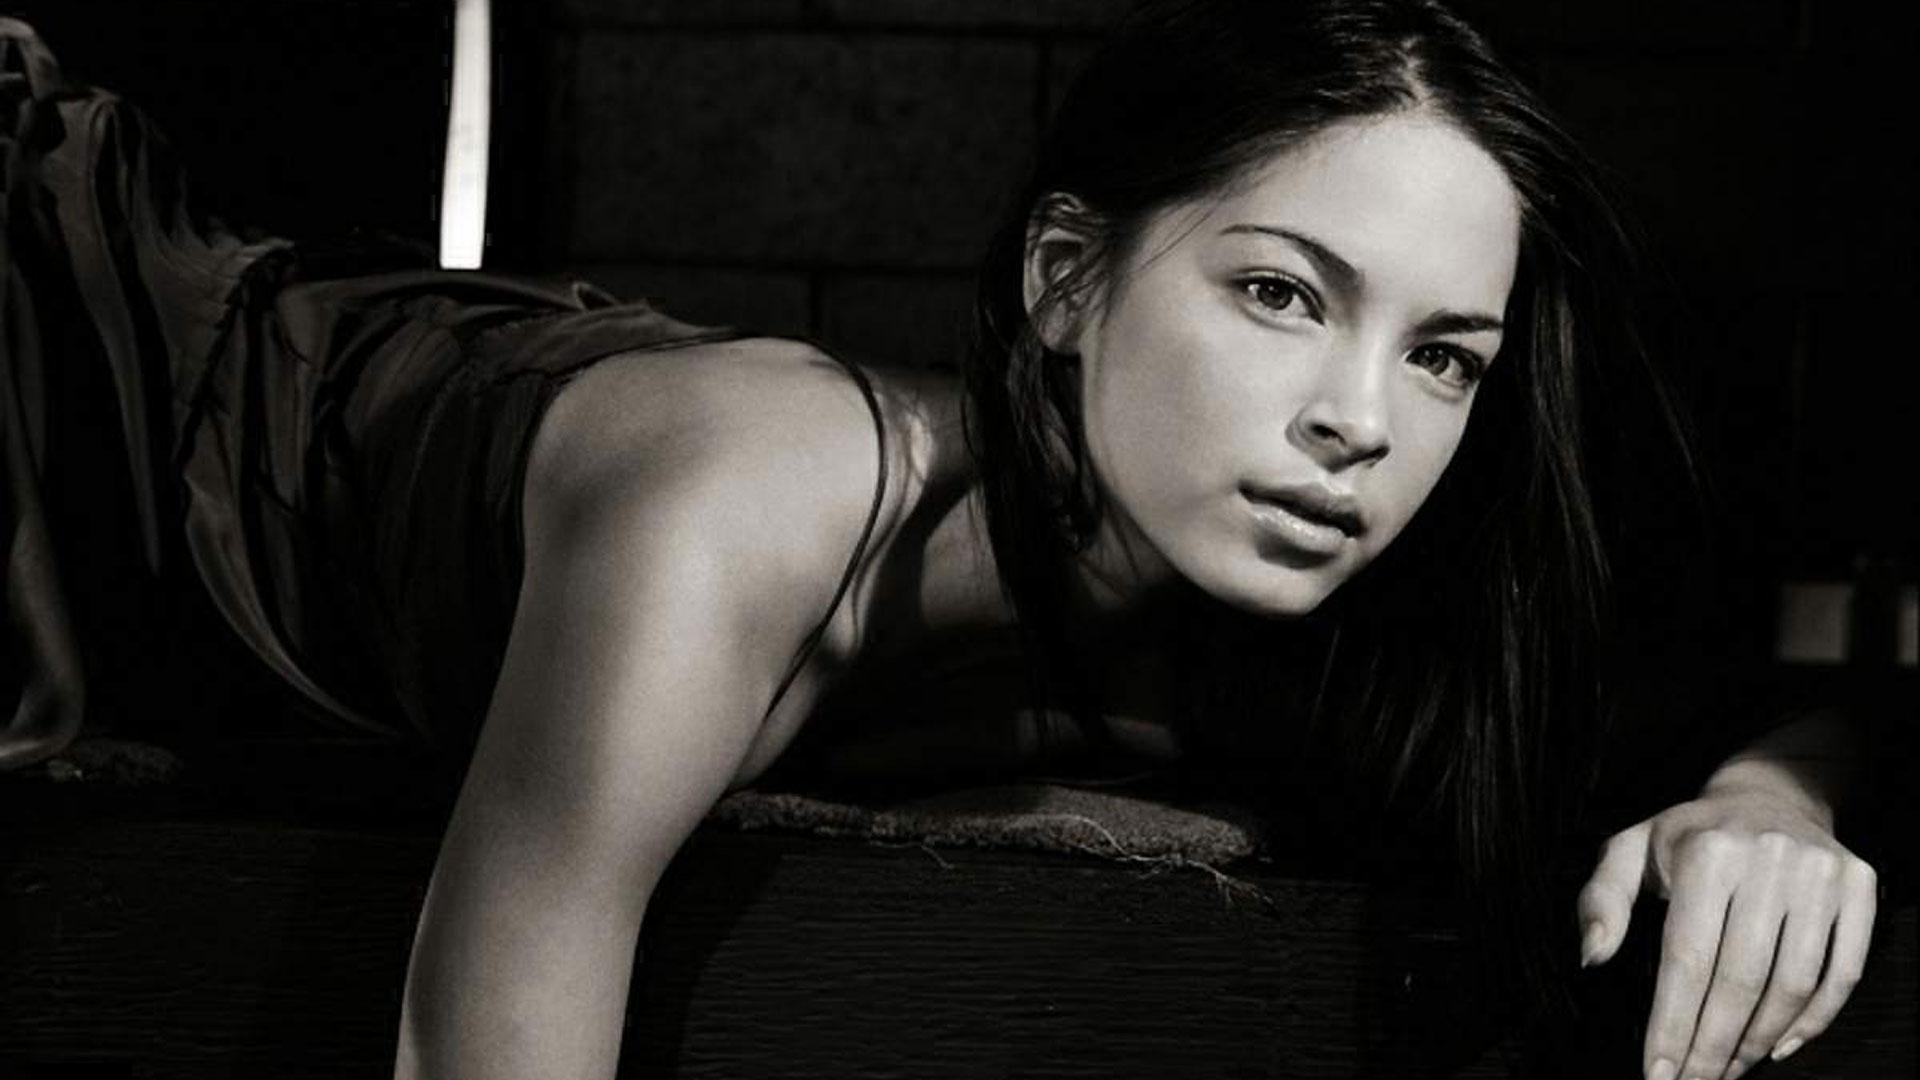 Free Download Kristin Kreuk Wallpapers High Resolution And Quality